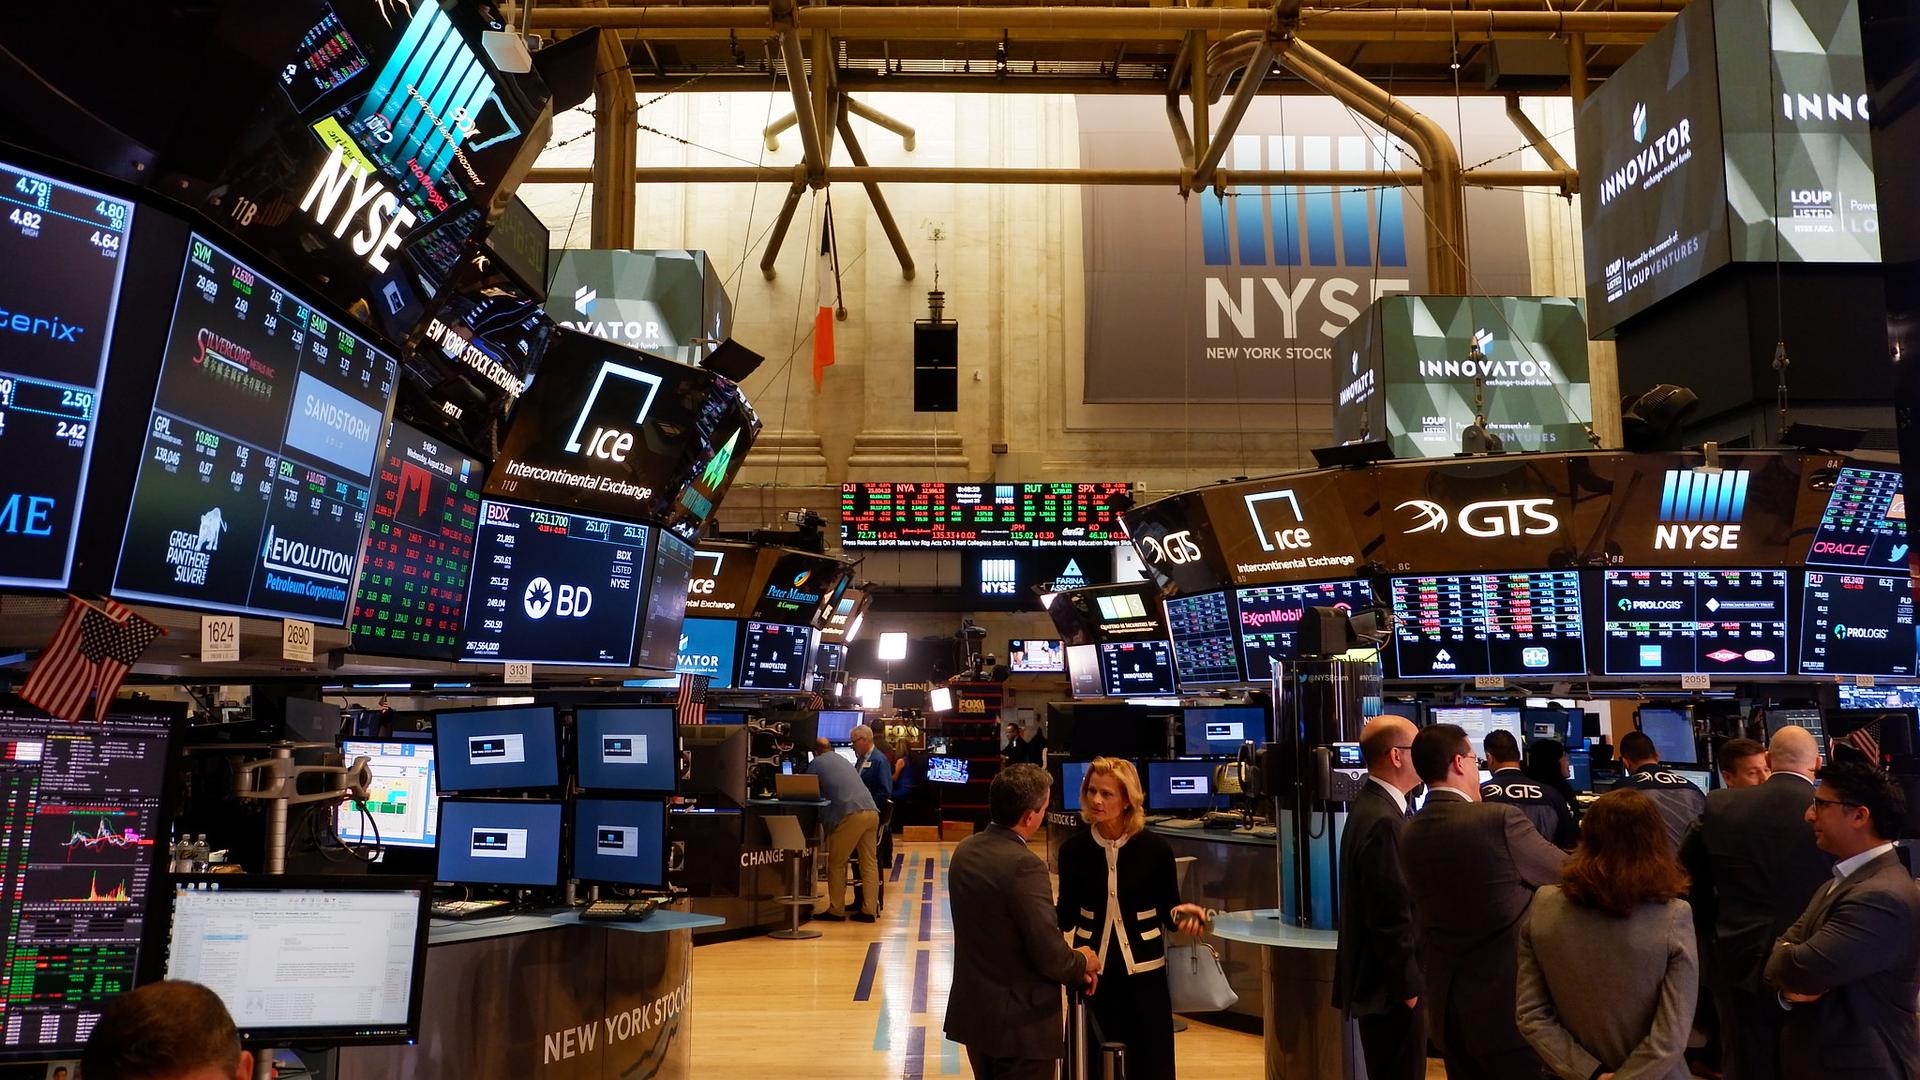 The trading floor at the New York Stock Exchange